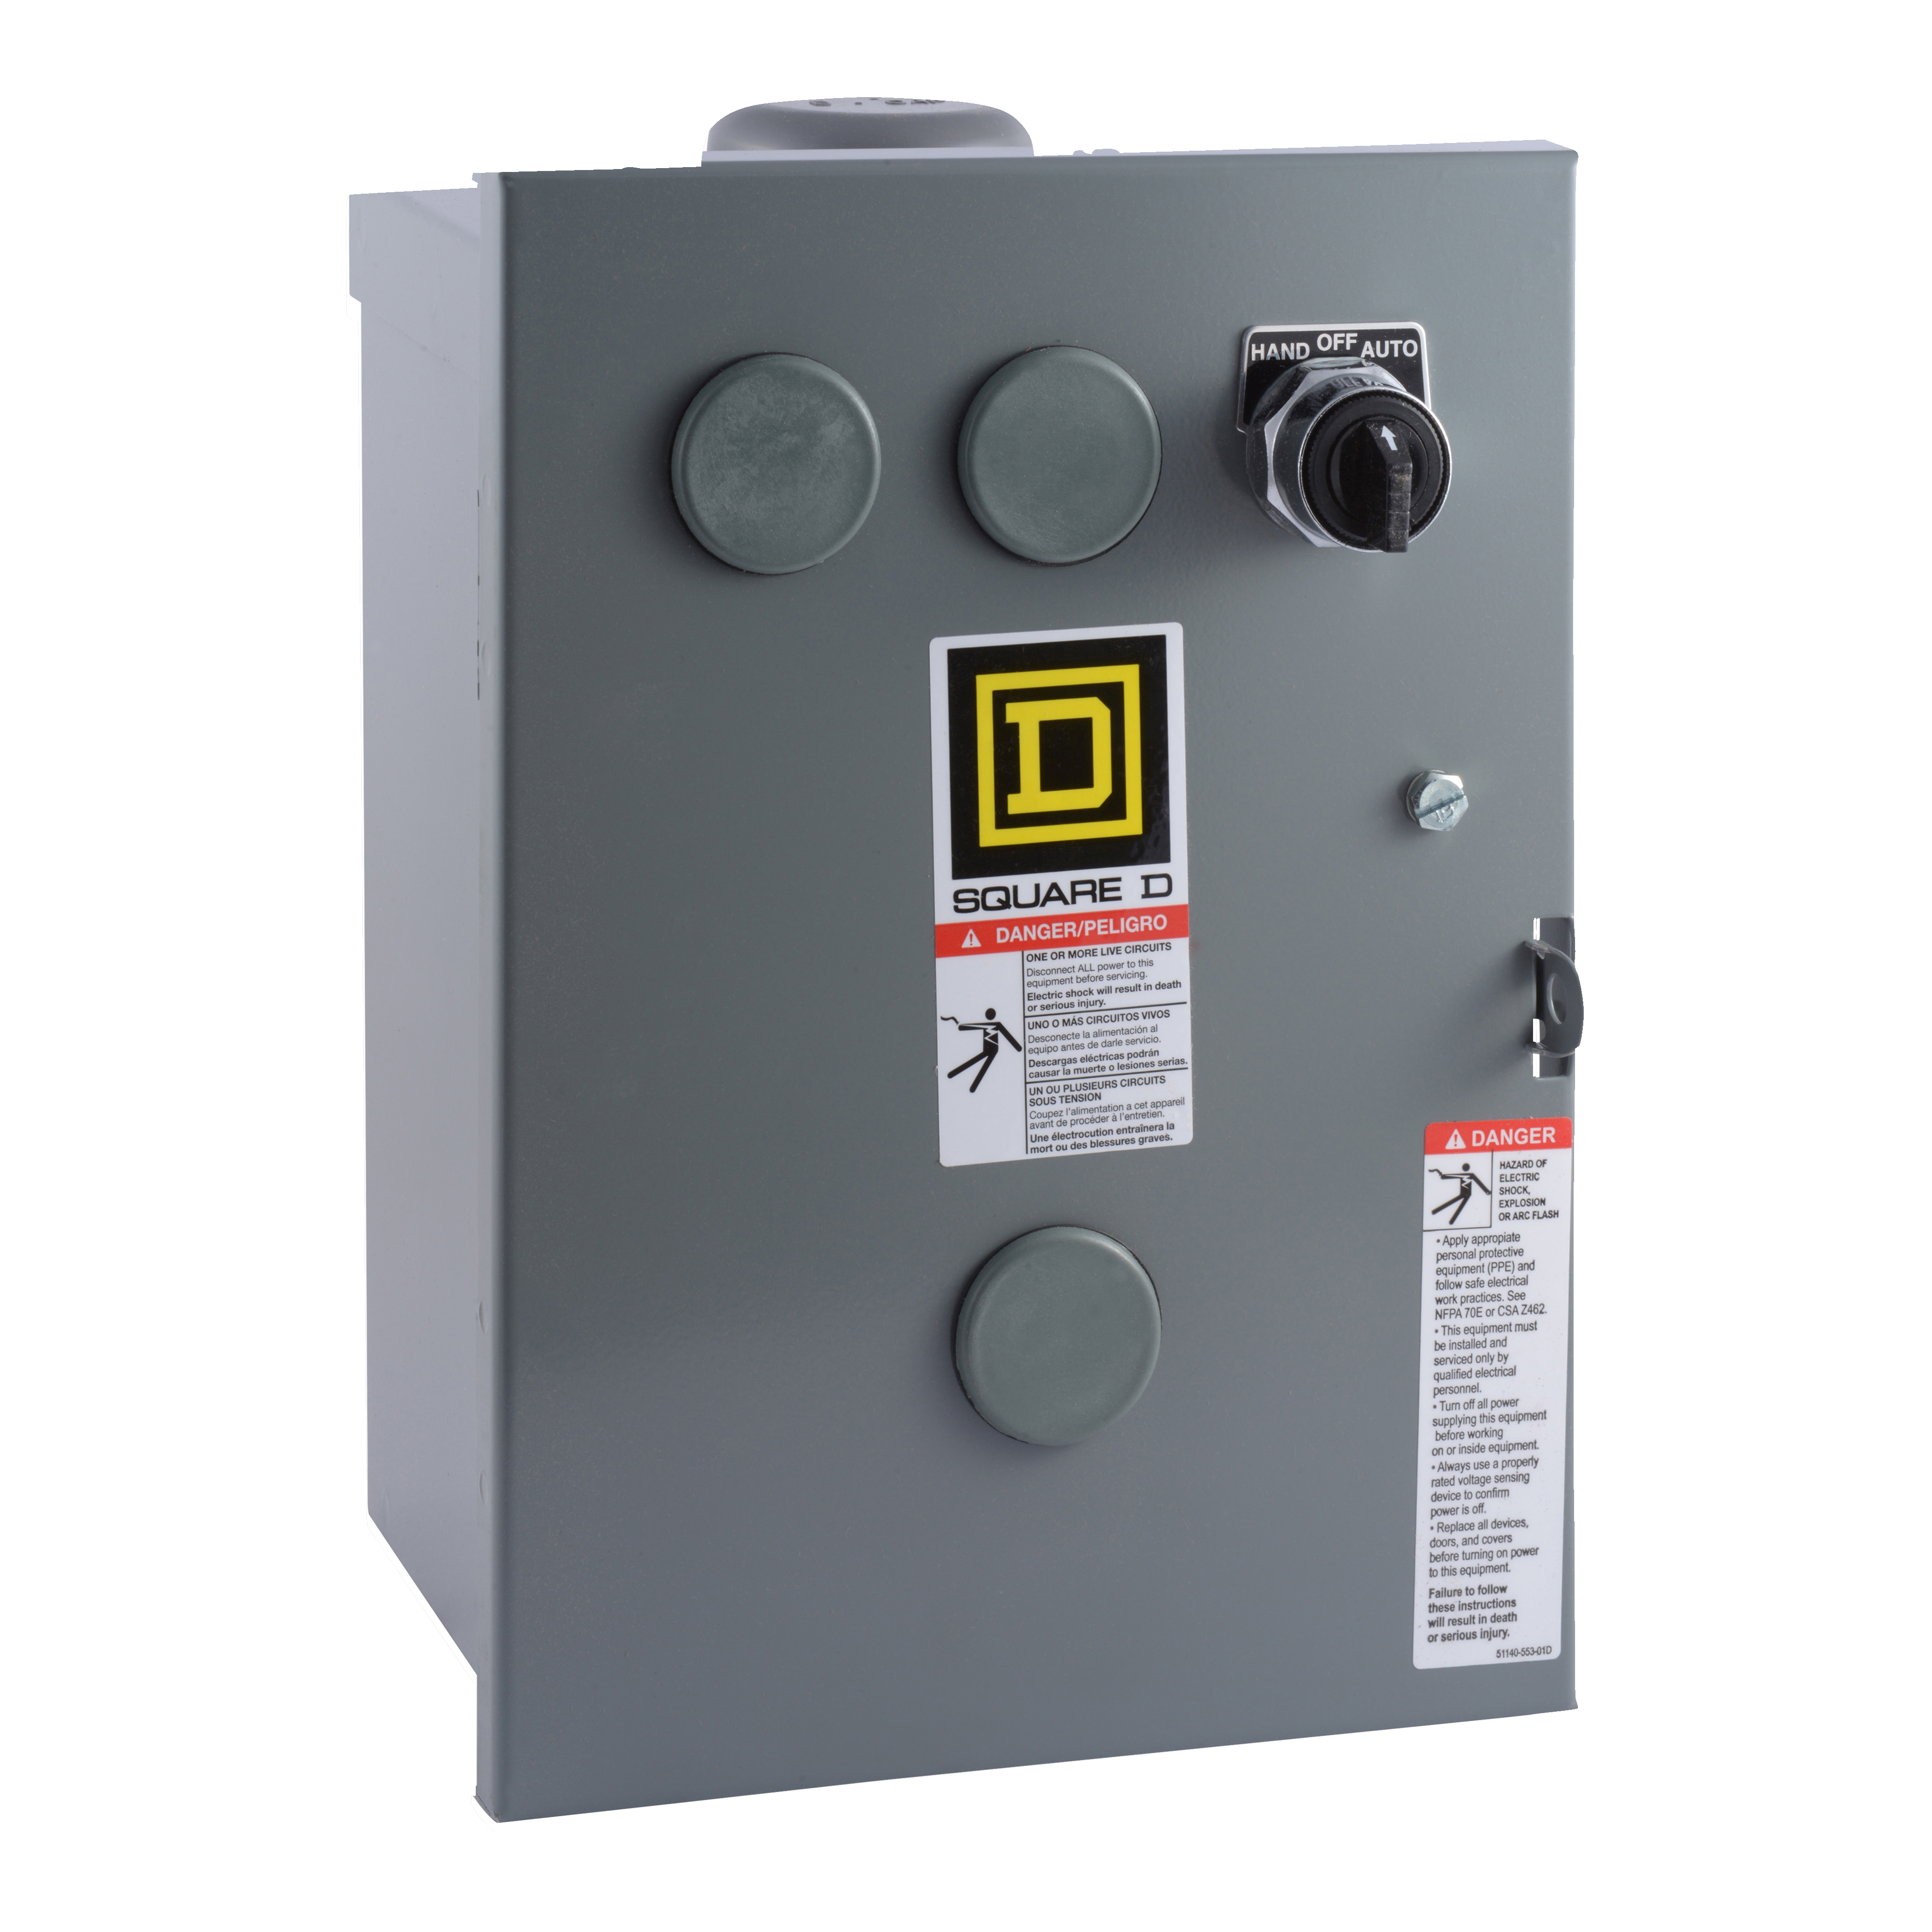 Contactor, Type S, multipole lighting, electrically held, 30A, 2 pole, 220/240 VAC 50/60 Hz coil, NEMA 3R, +options